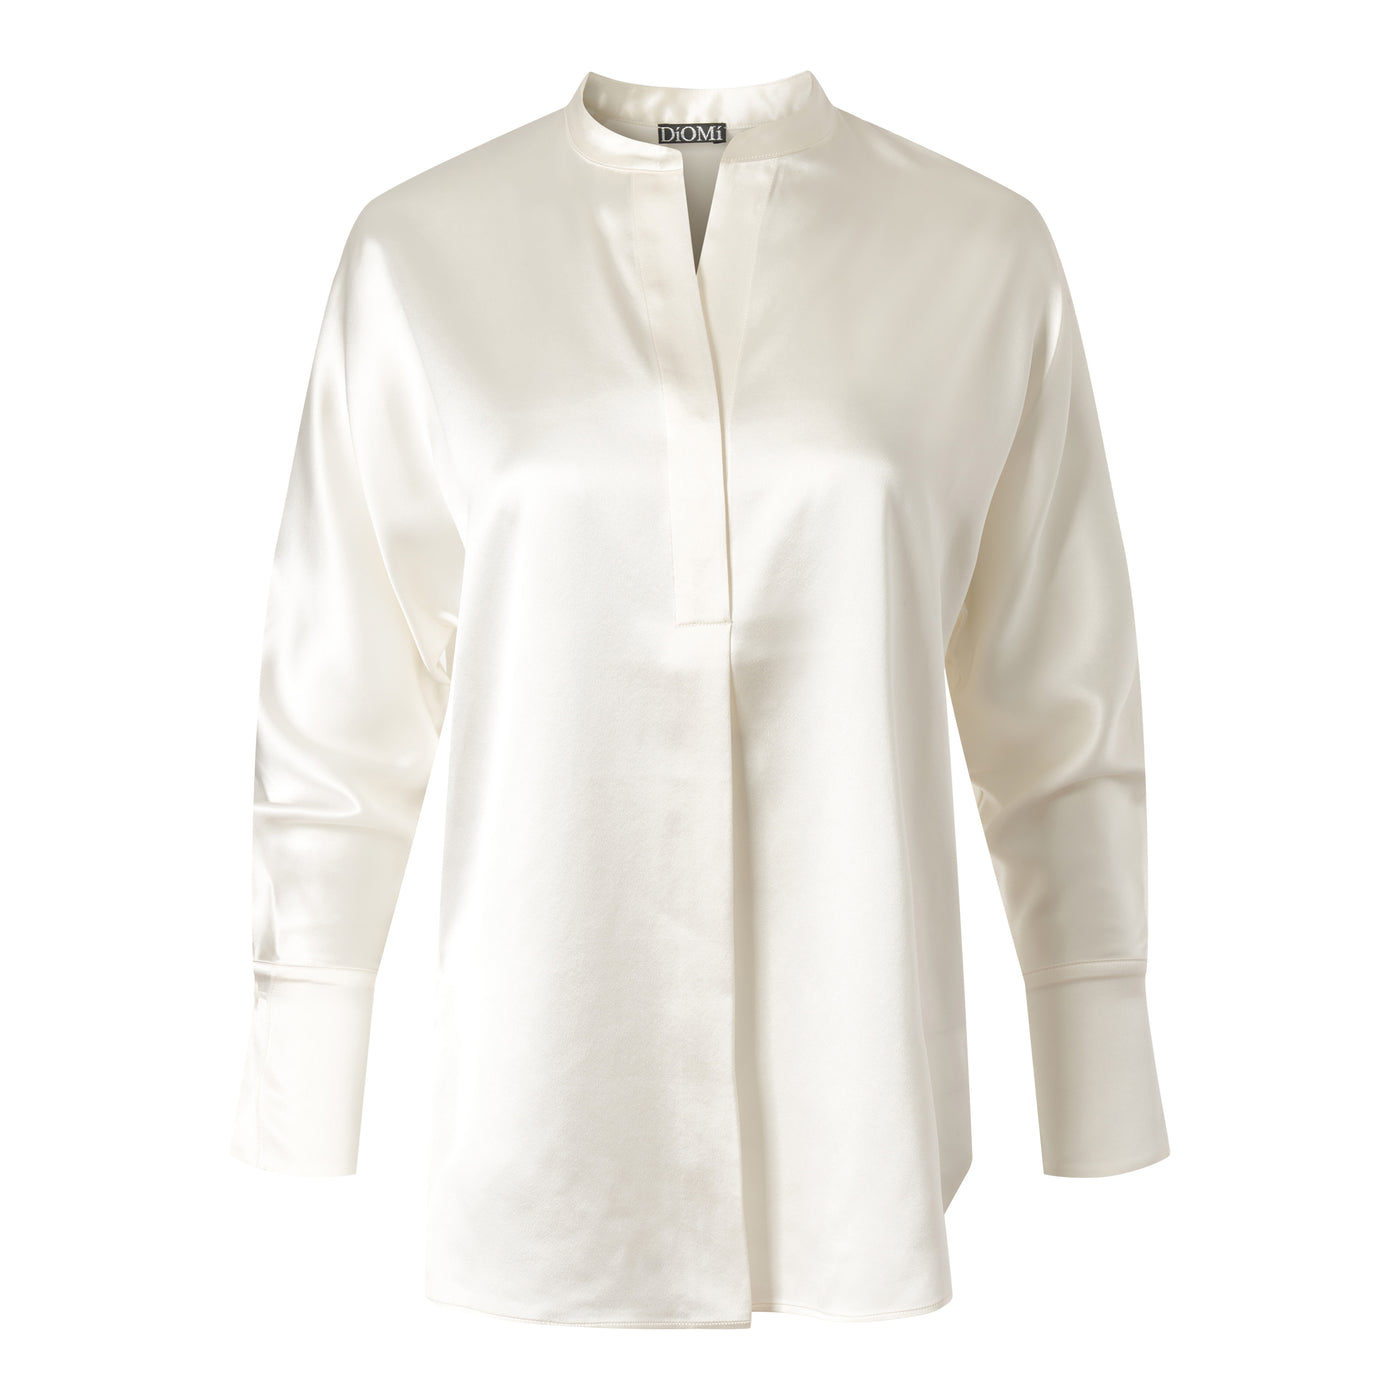 Classic Band Collar Blouse